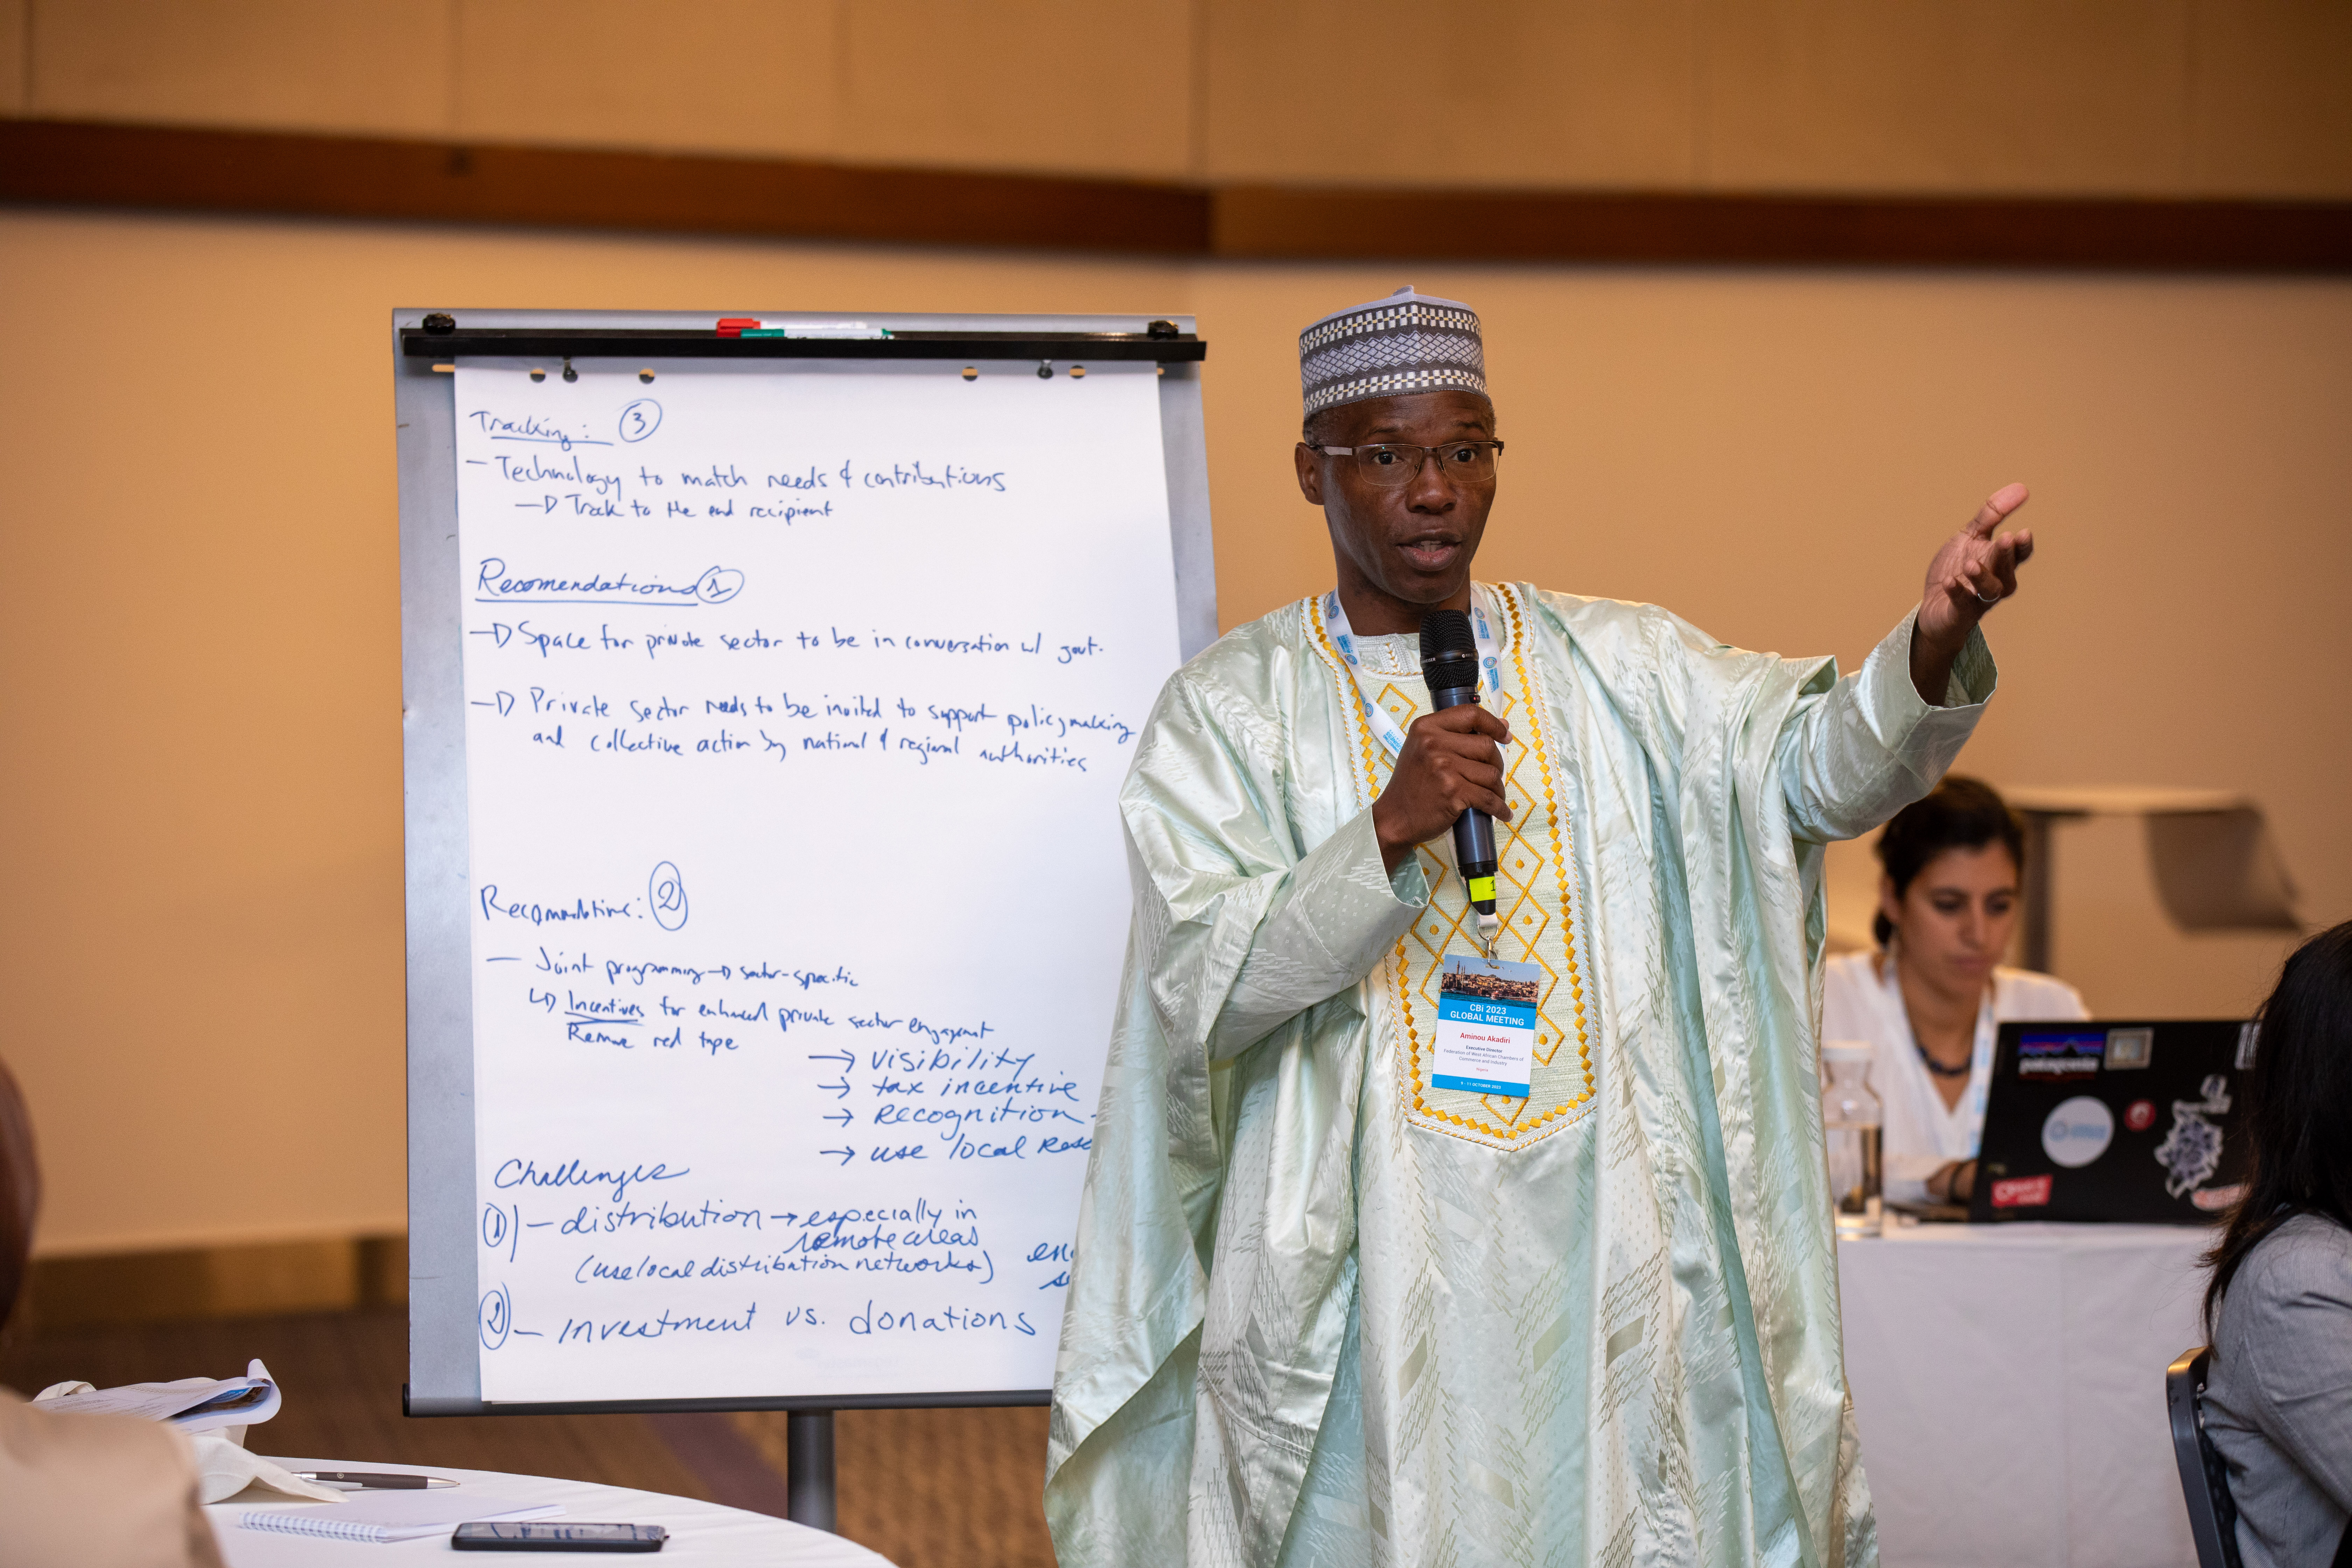 One of the meeting participants, from Nigeria, presents back findings from group work.